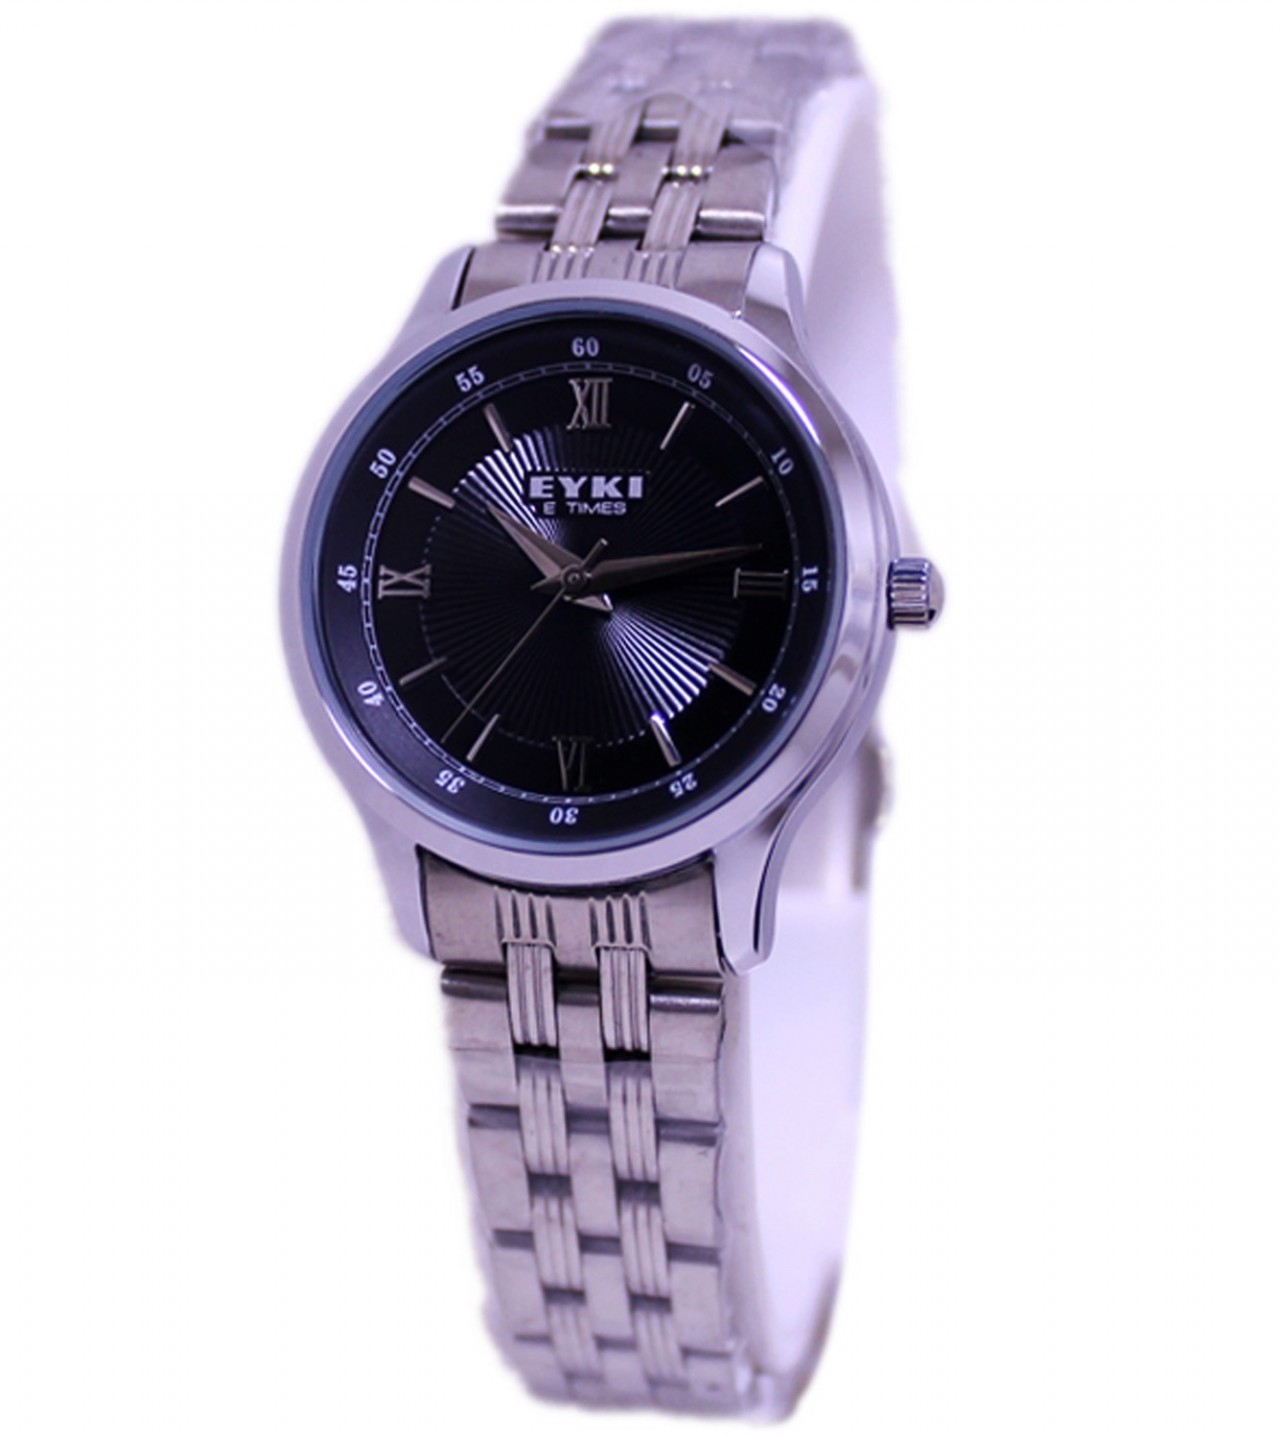 EYKI Stainless Steel Black Dial Analog Watch for Women - Silver